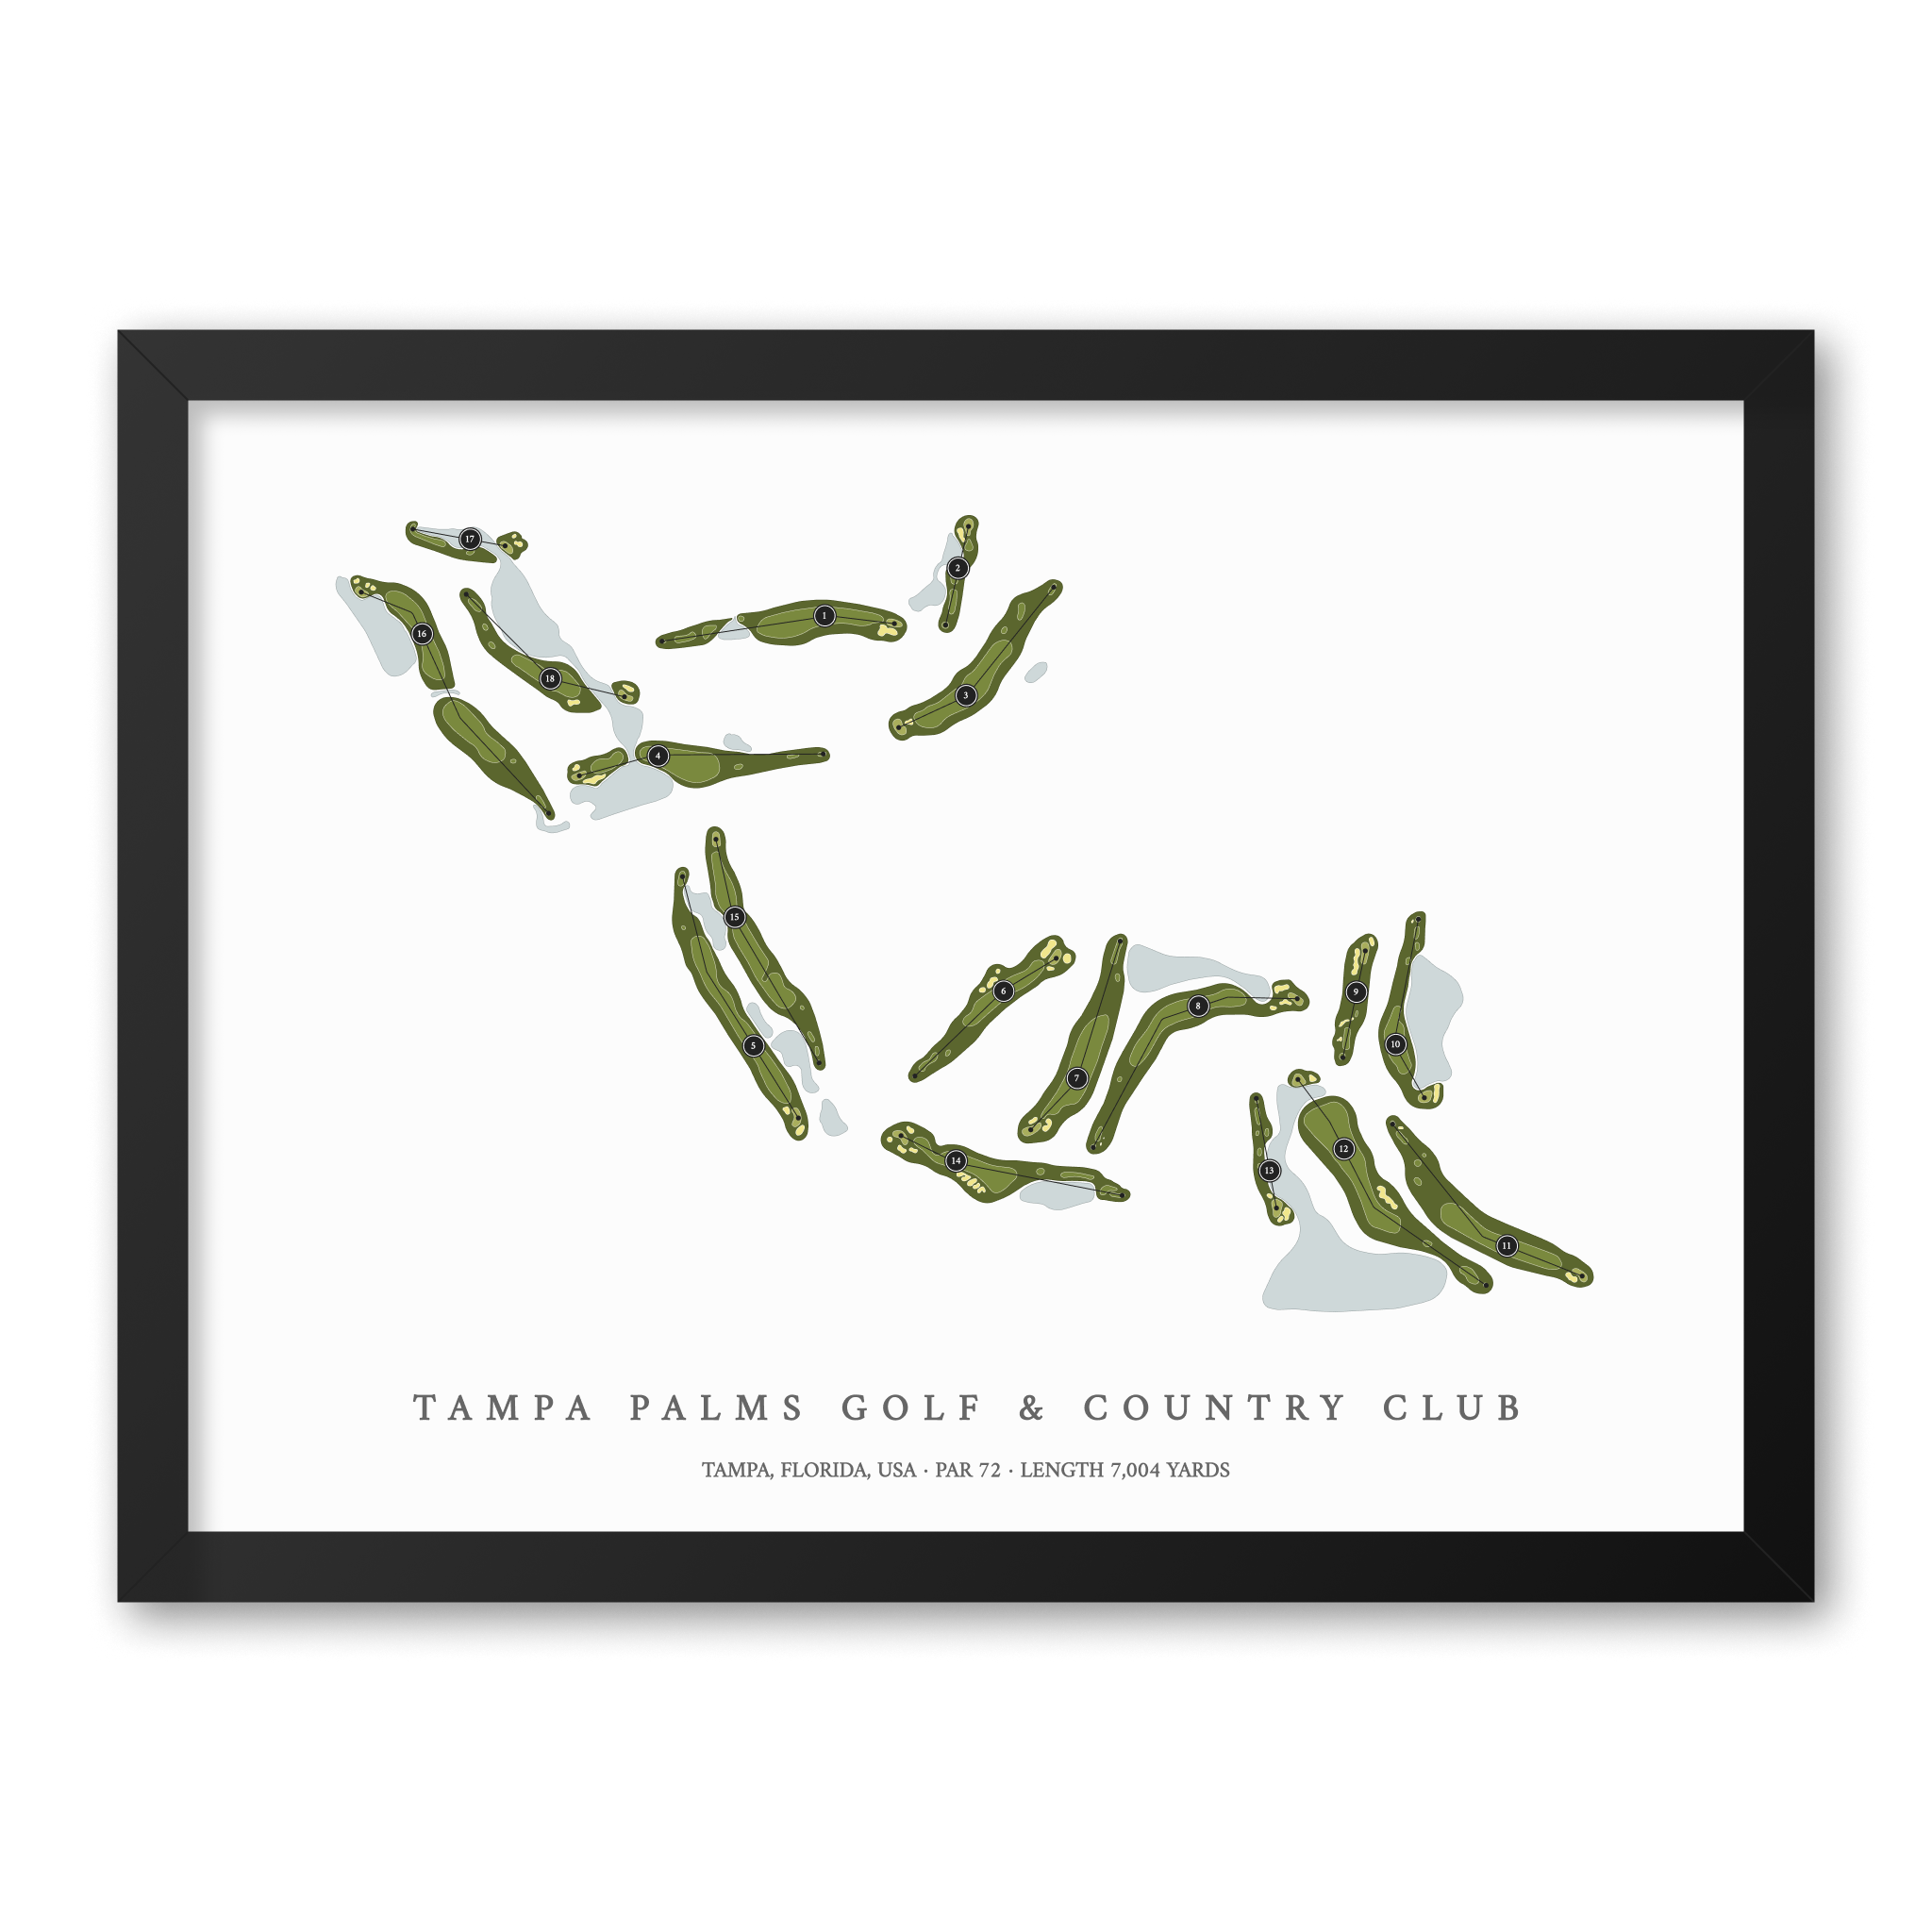 Tampa Palms Golf & Country Club | Golf Course Map | Black Frame